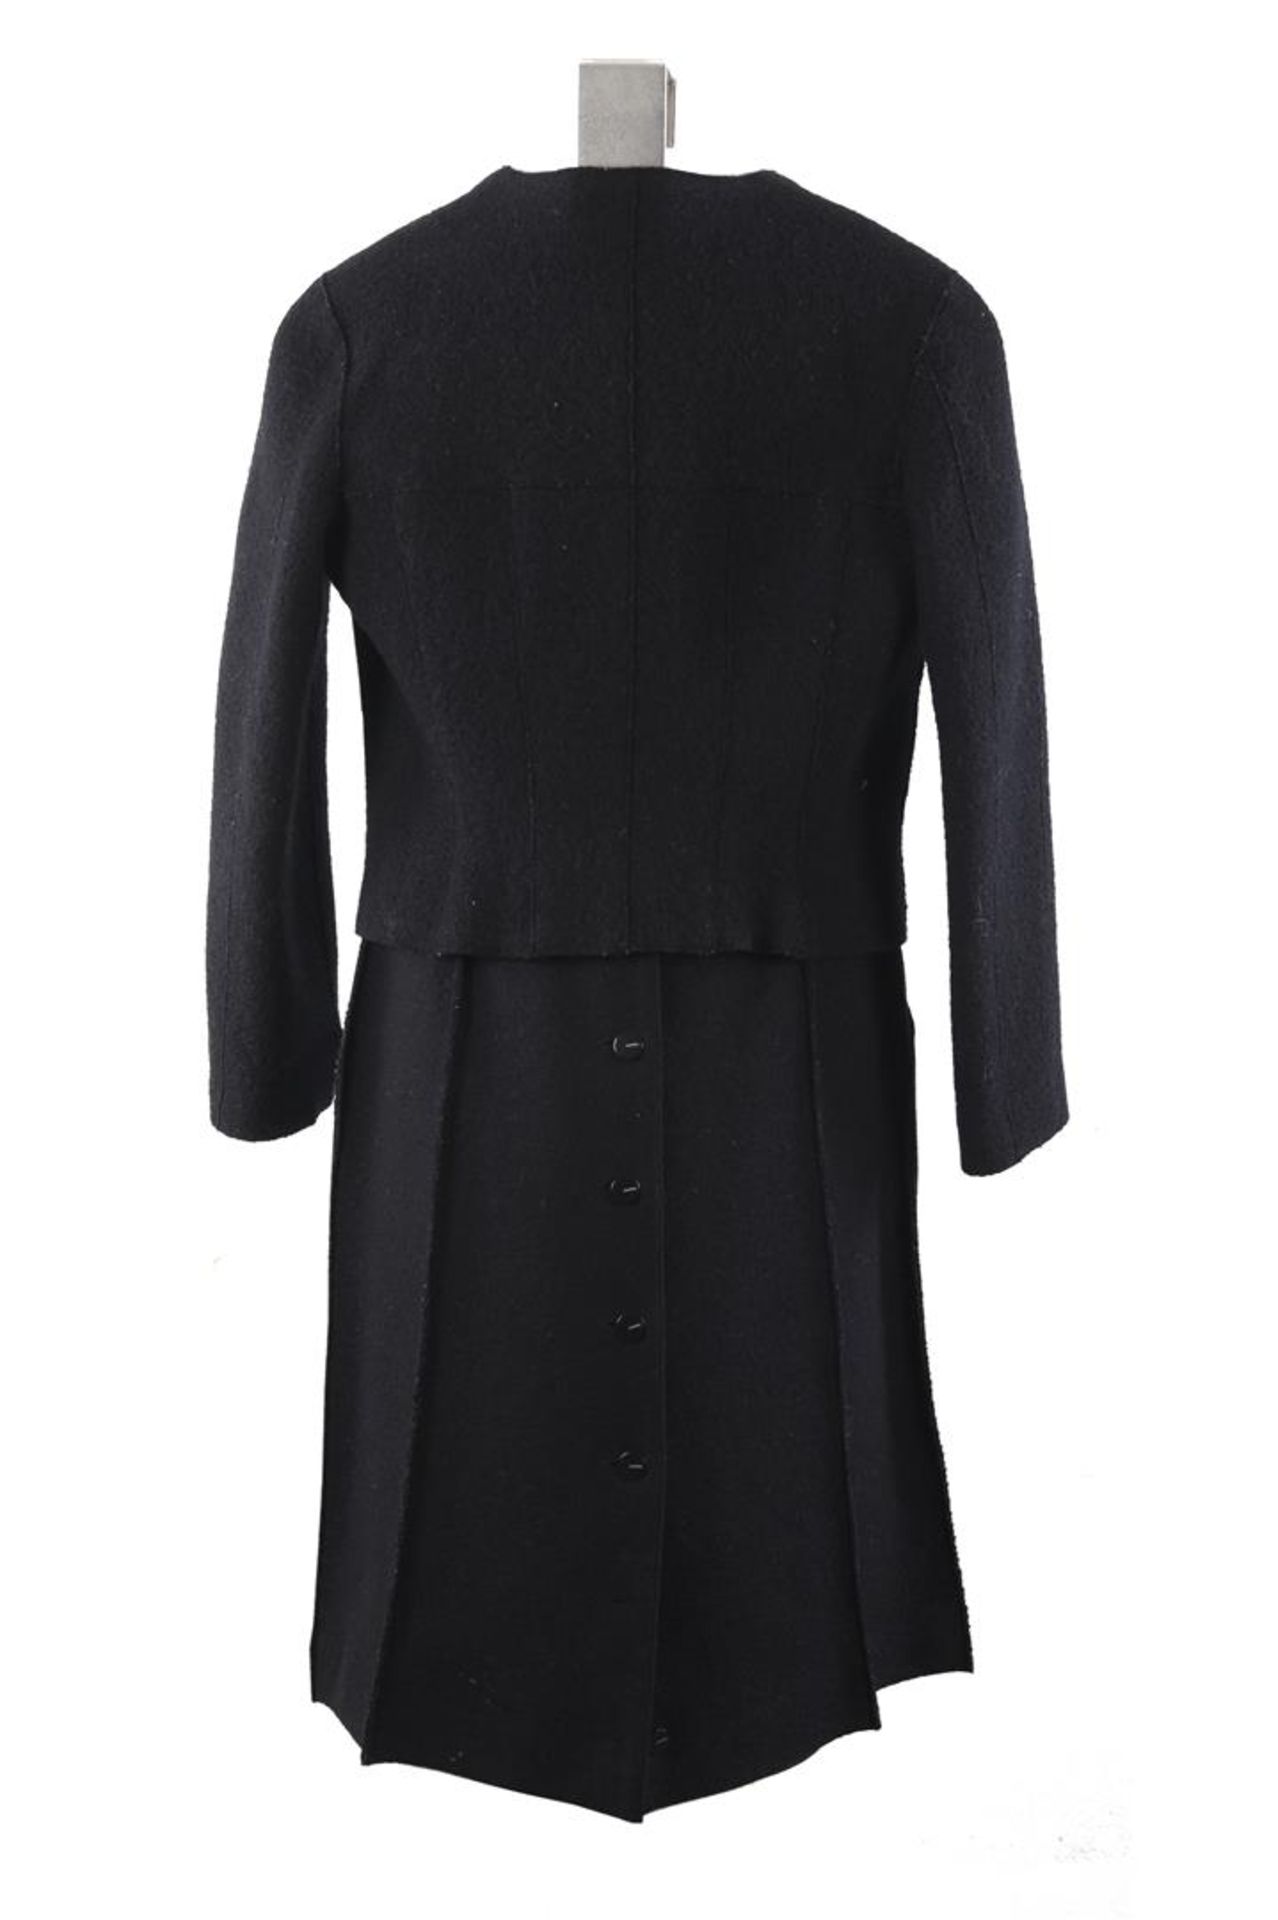 Chanel, Identification, black wool deux-piece, jacket and skirt. Size 40 Fr. - Image 2 of 4